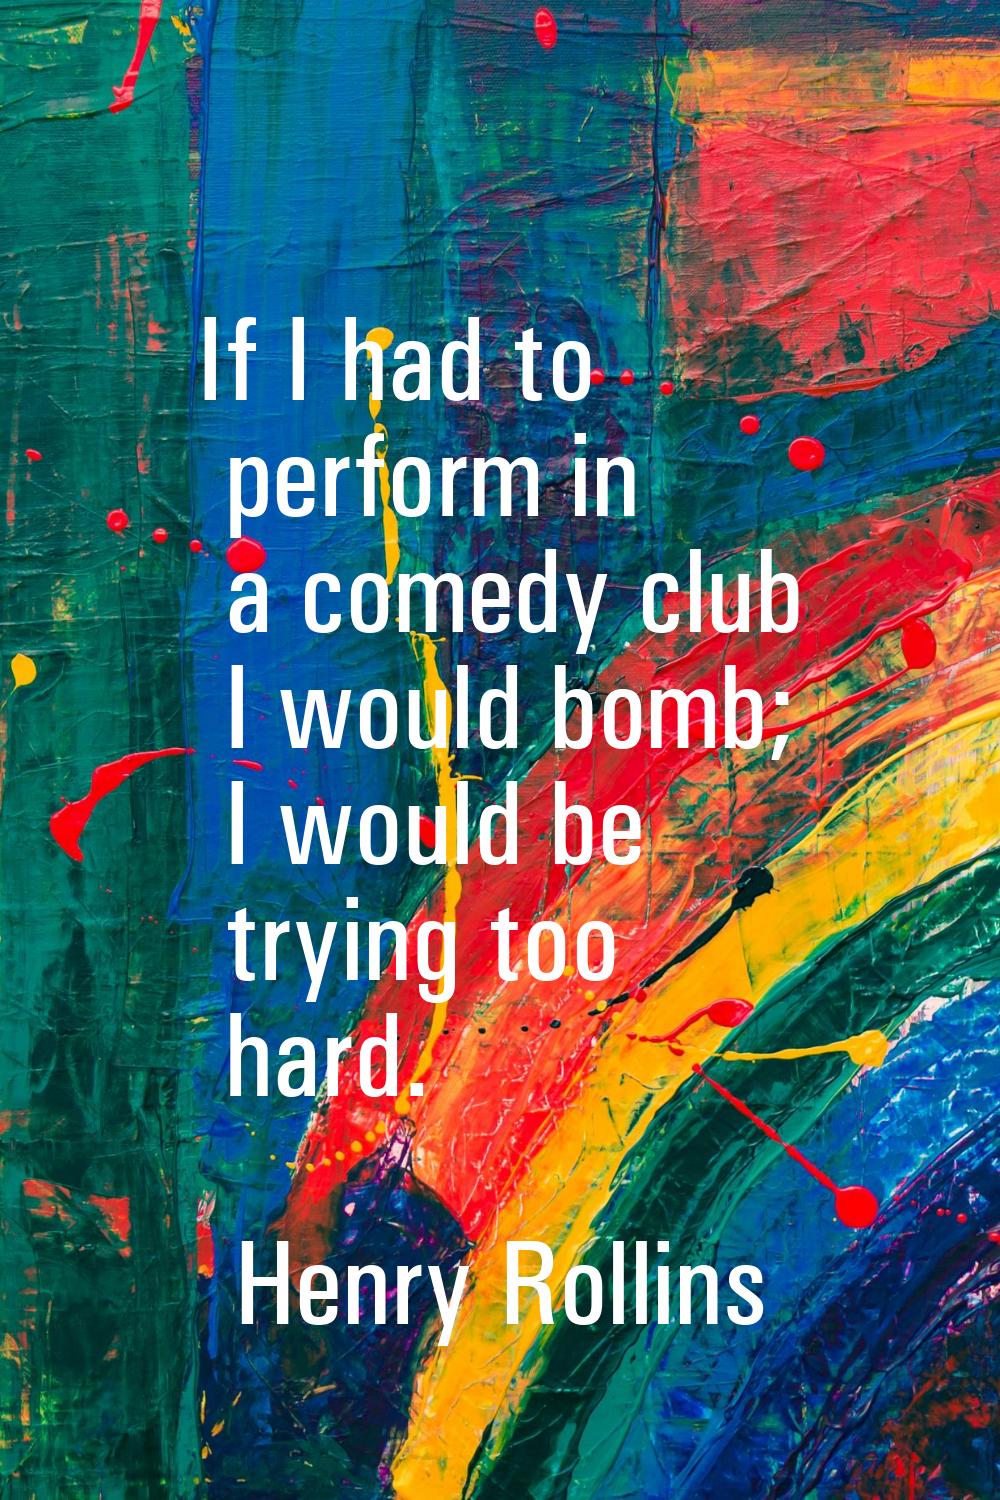 If I had to perform in a comedy club I would bomb; I would be trying too hard.